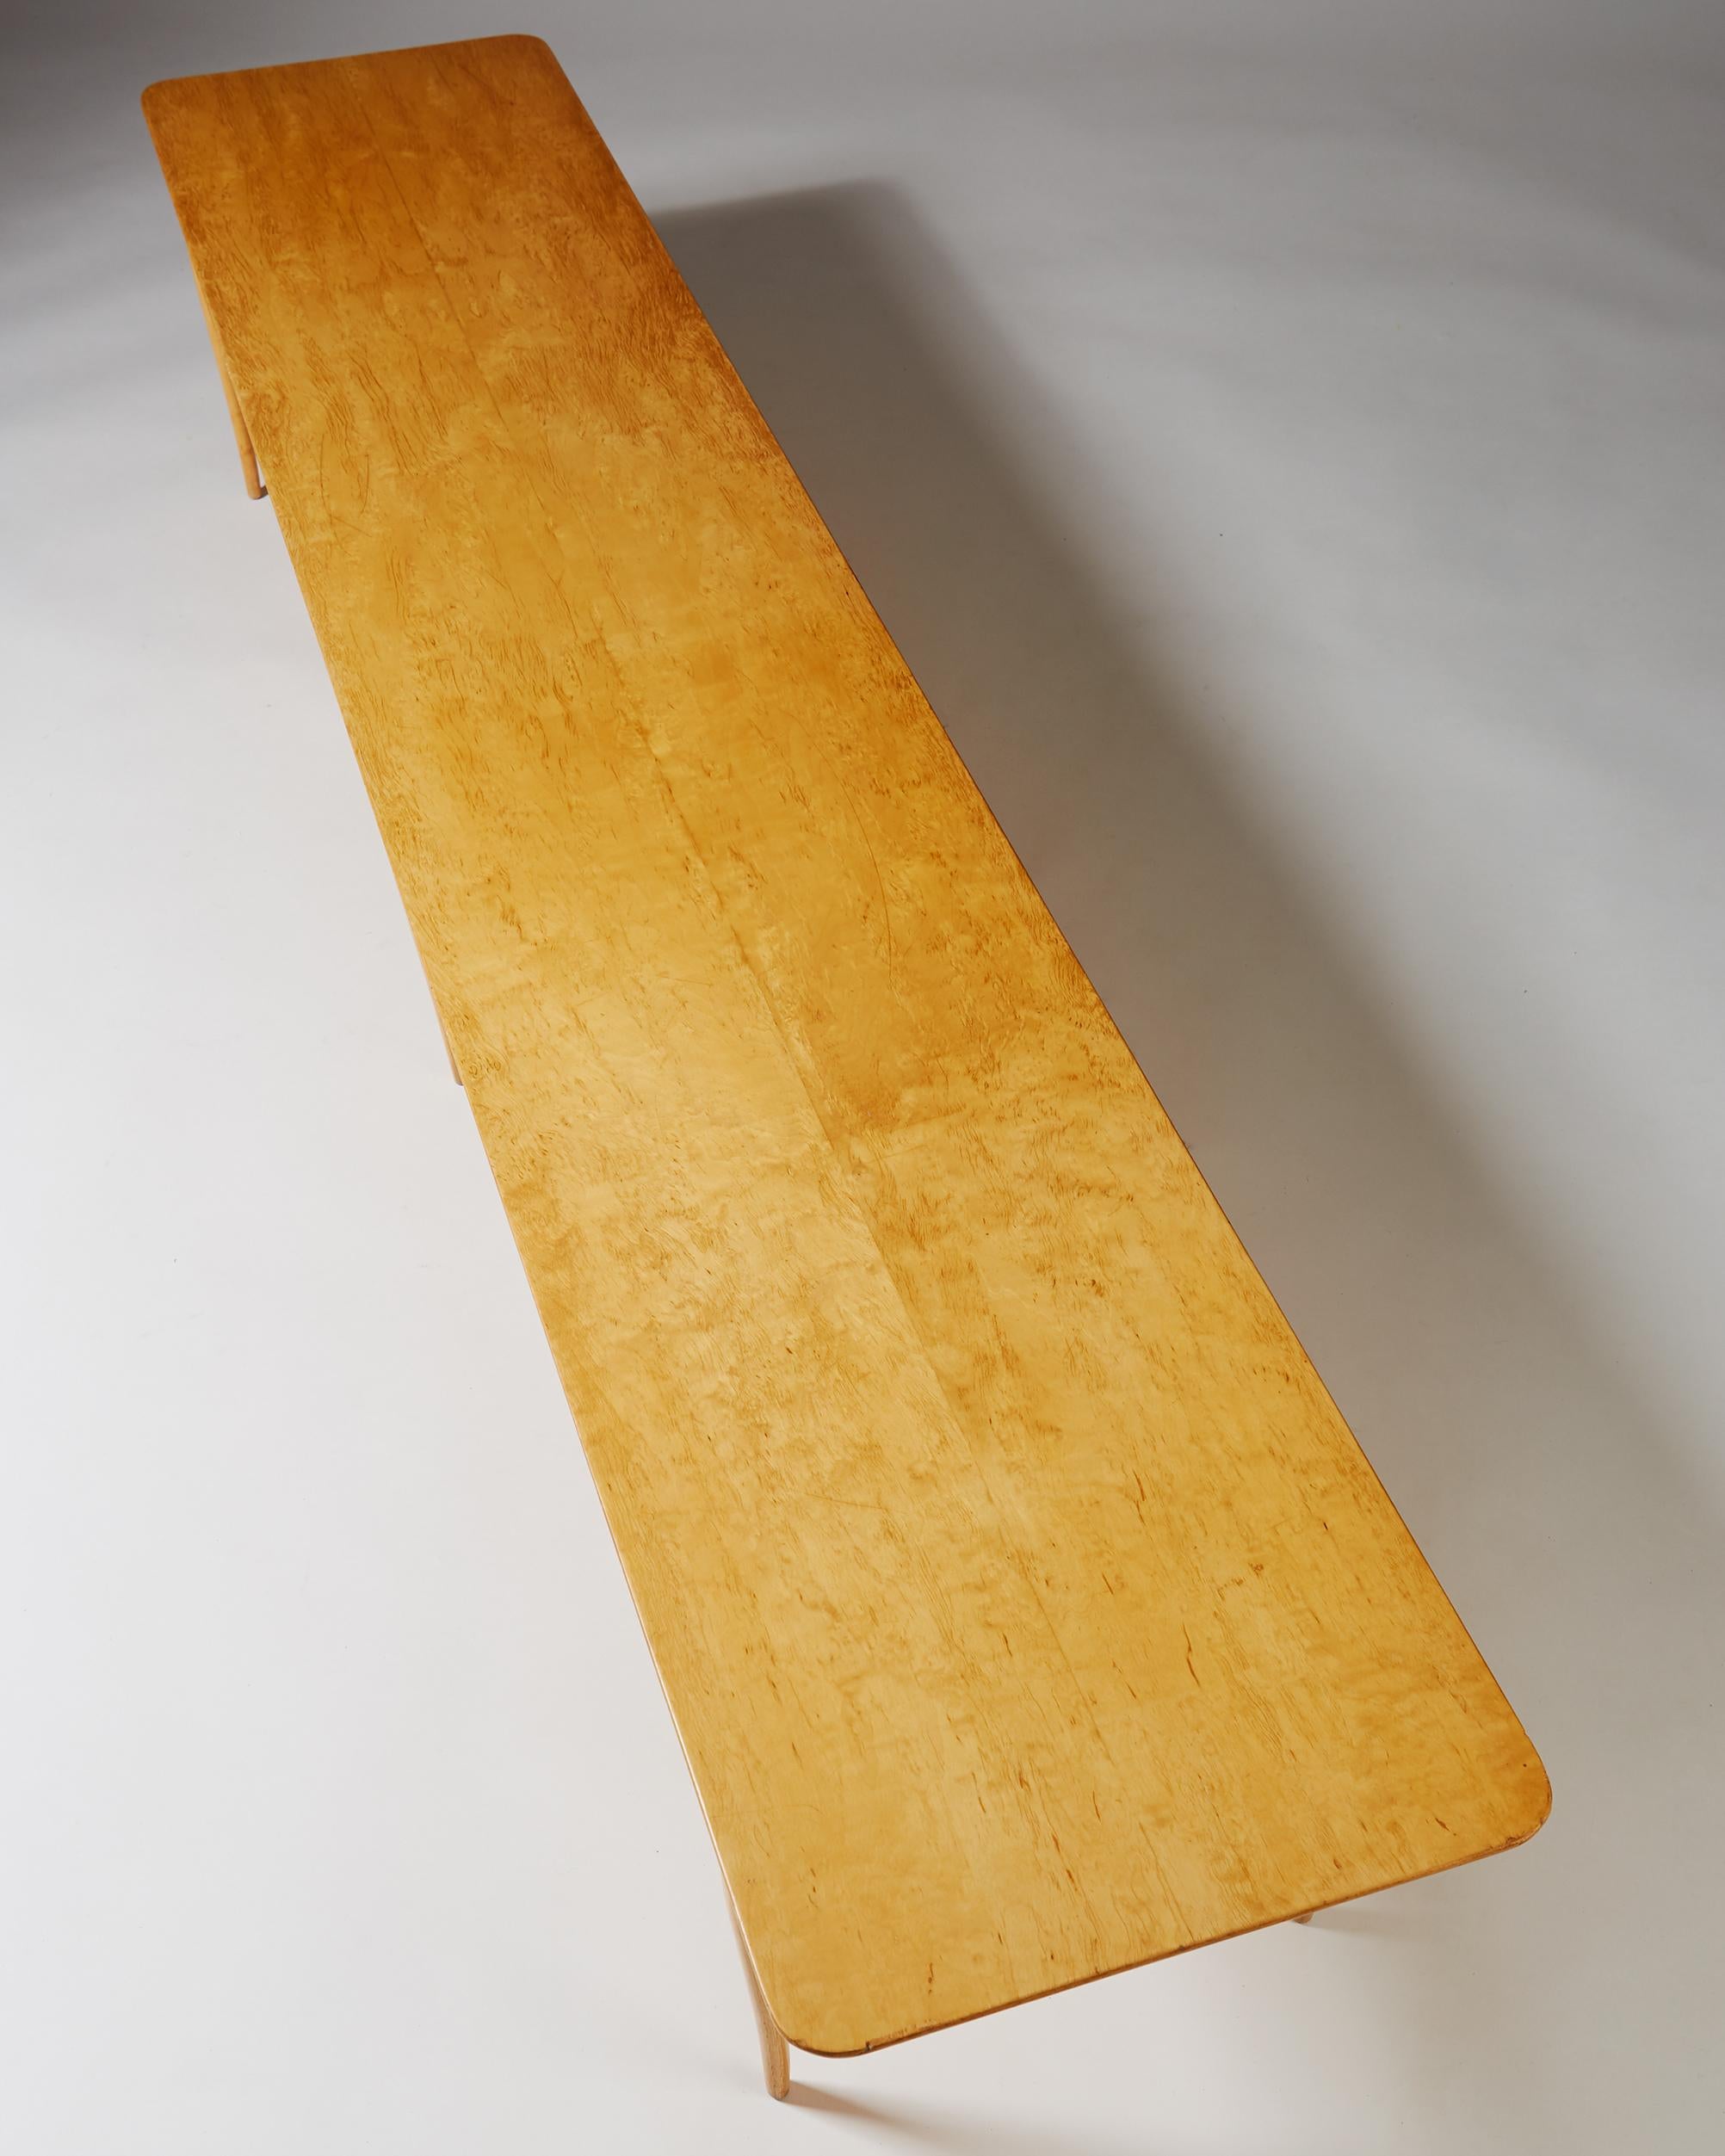 Mid-20th Century Bench or Coffee Table “Annika” Designed by Bruno Mathsson for Karl Mathsson